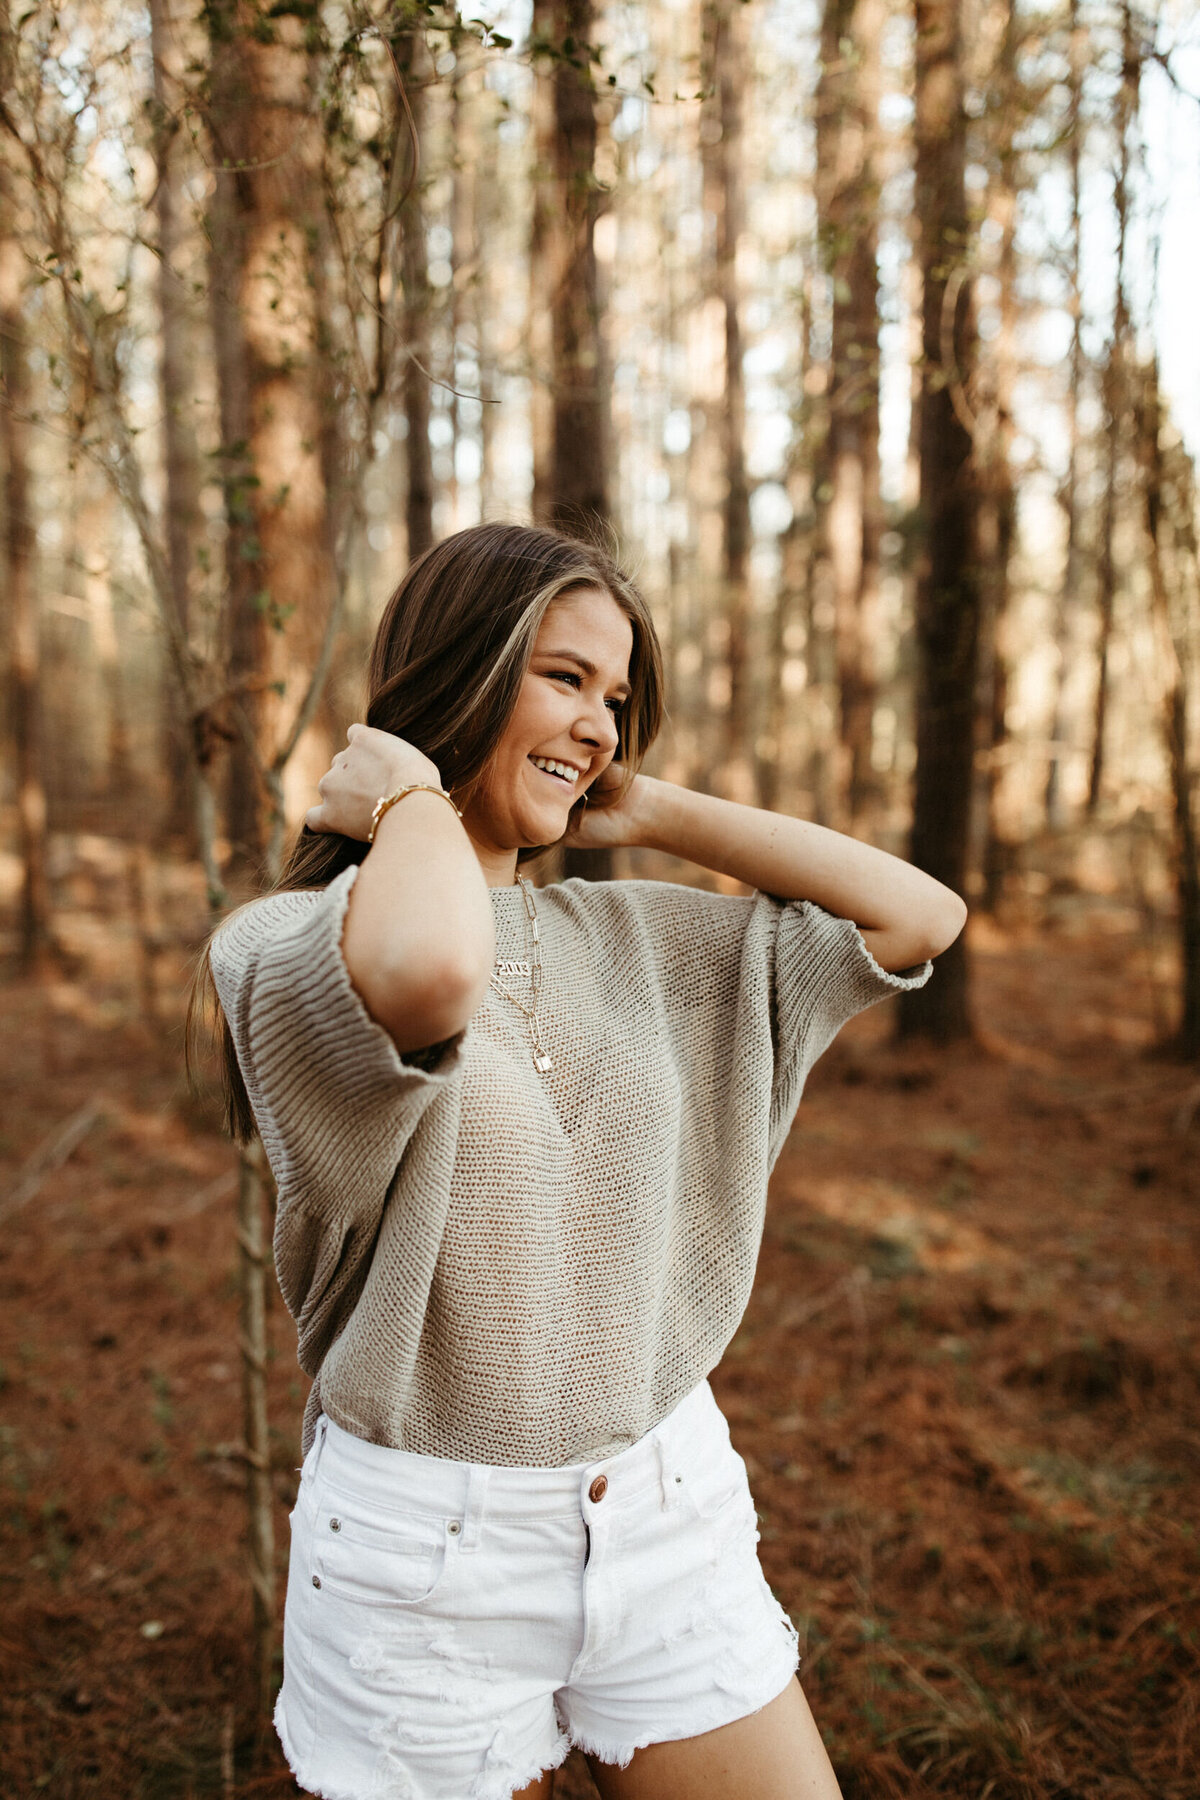 Senior girl in white shorts and grey loose shirt smiling in the woods